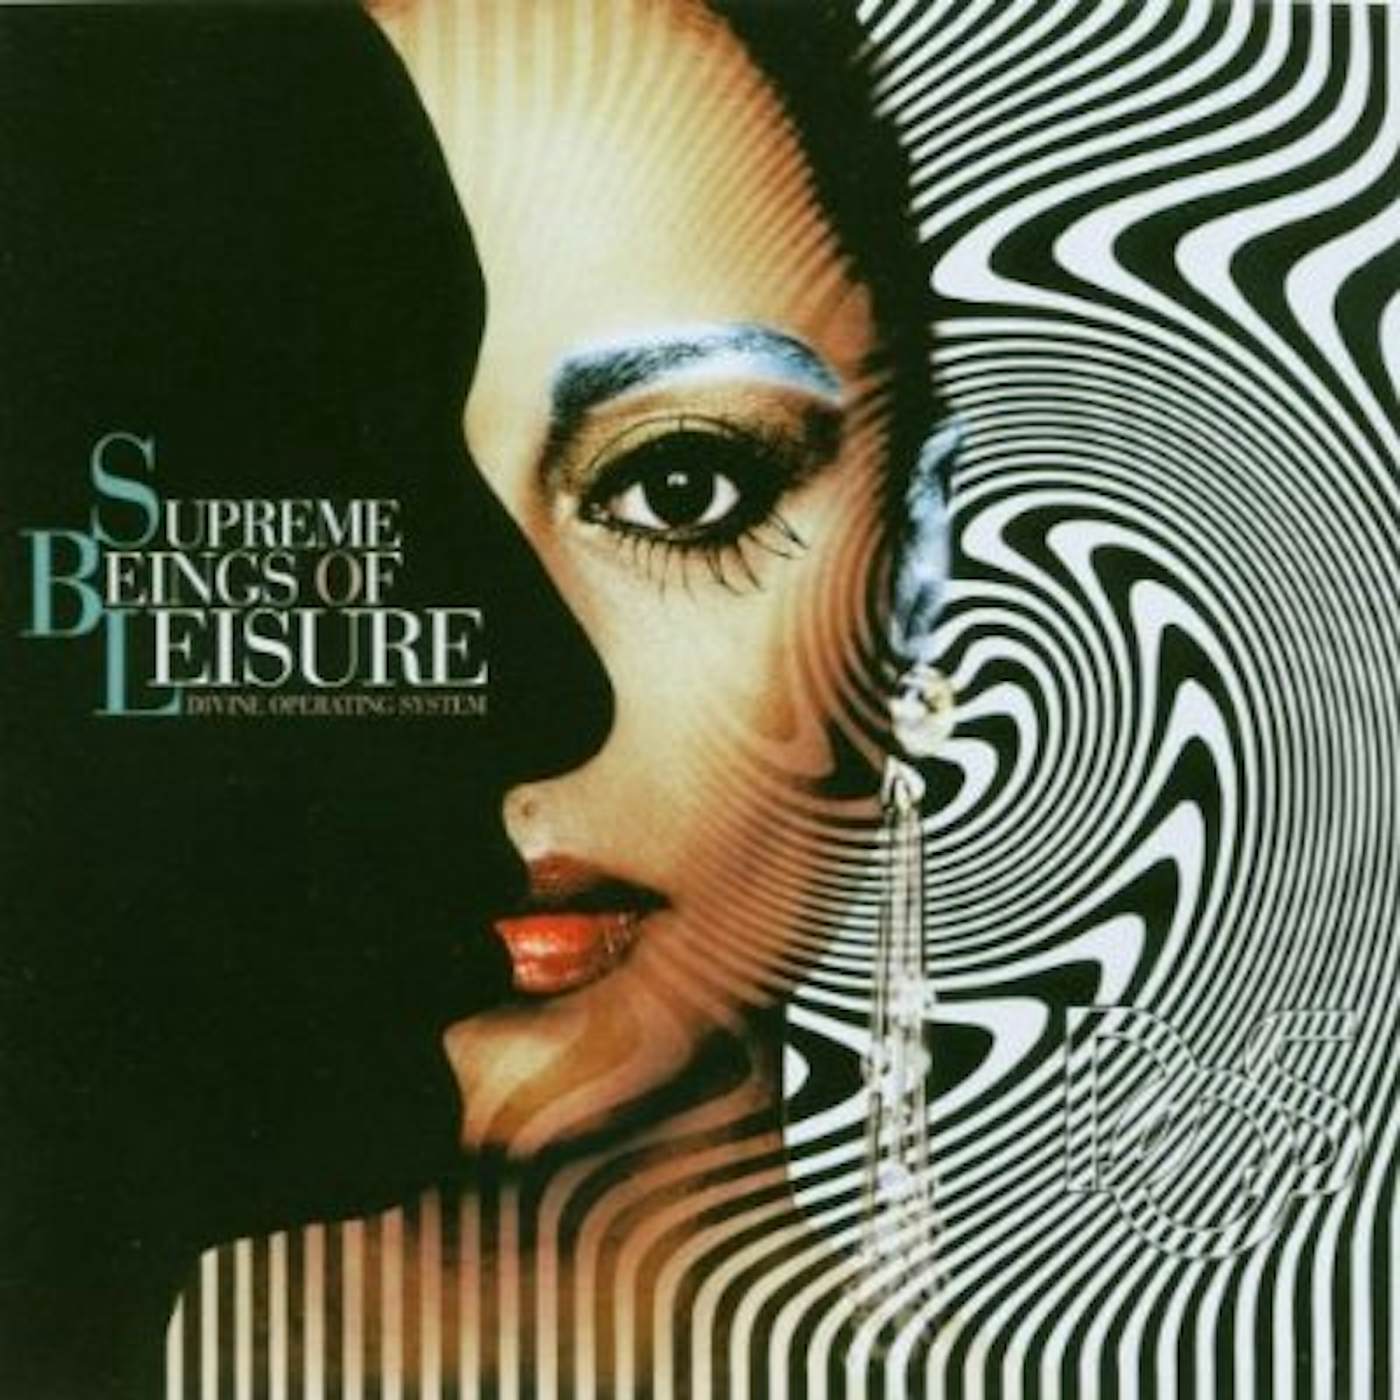 Supreme Beings of Leisure DIVINE OPERATING SYSTEM CD